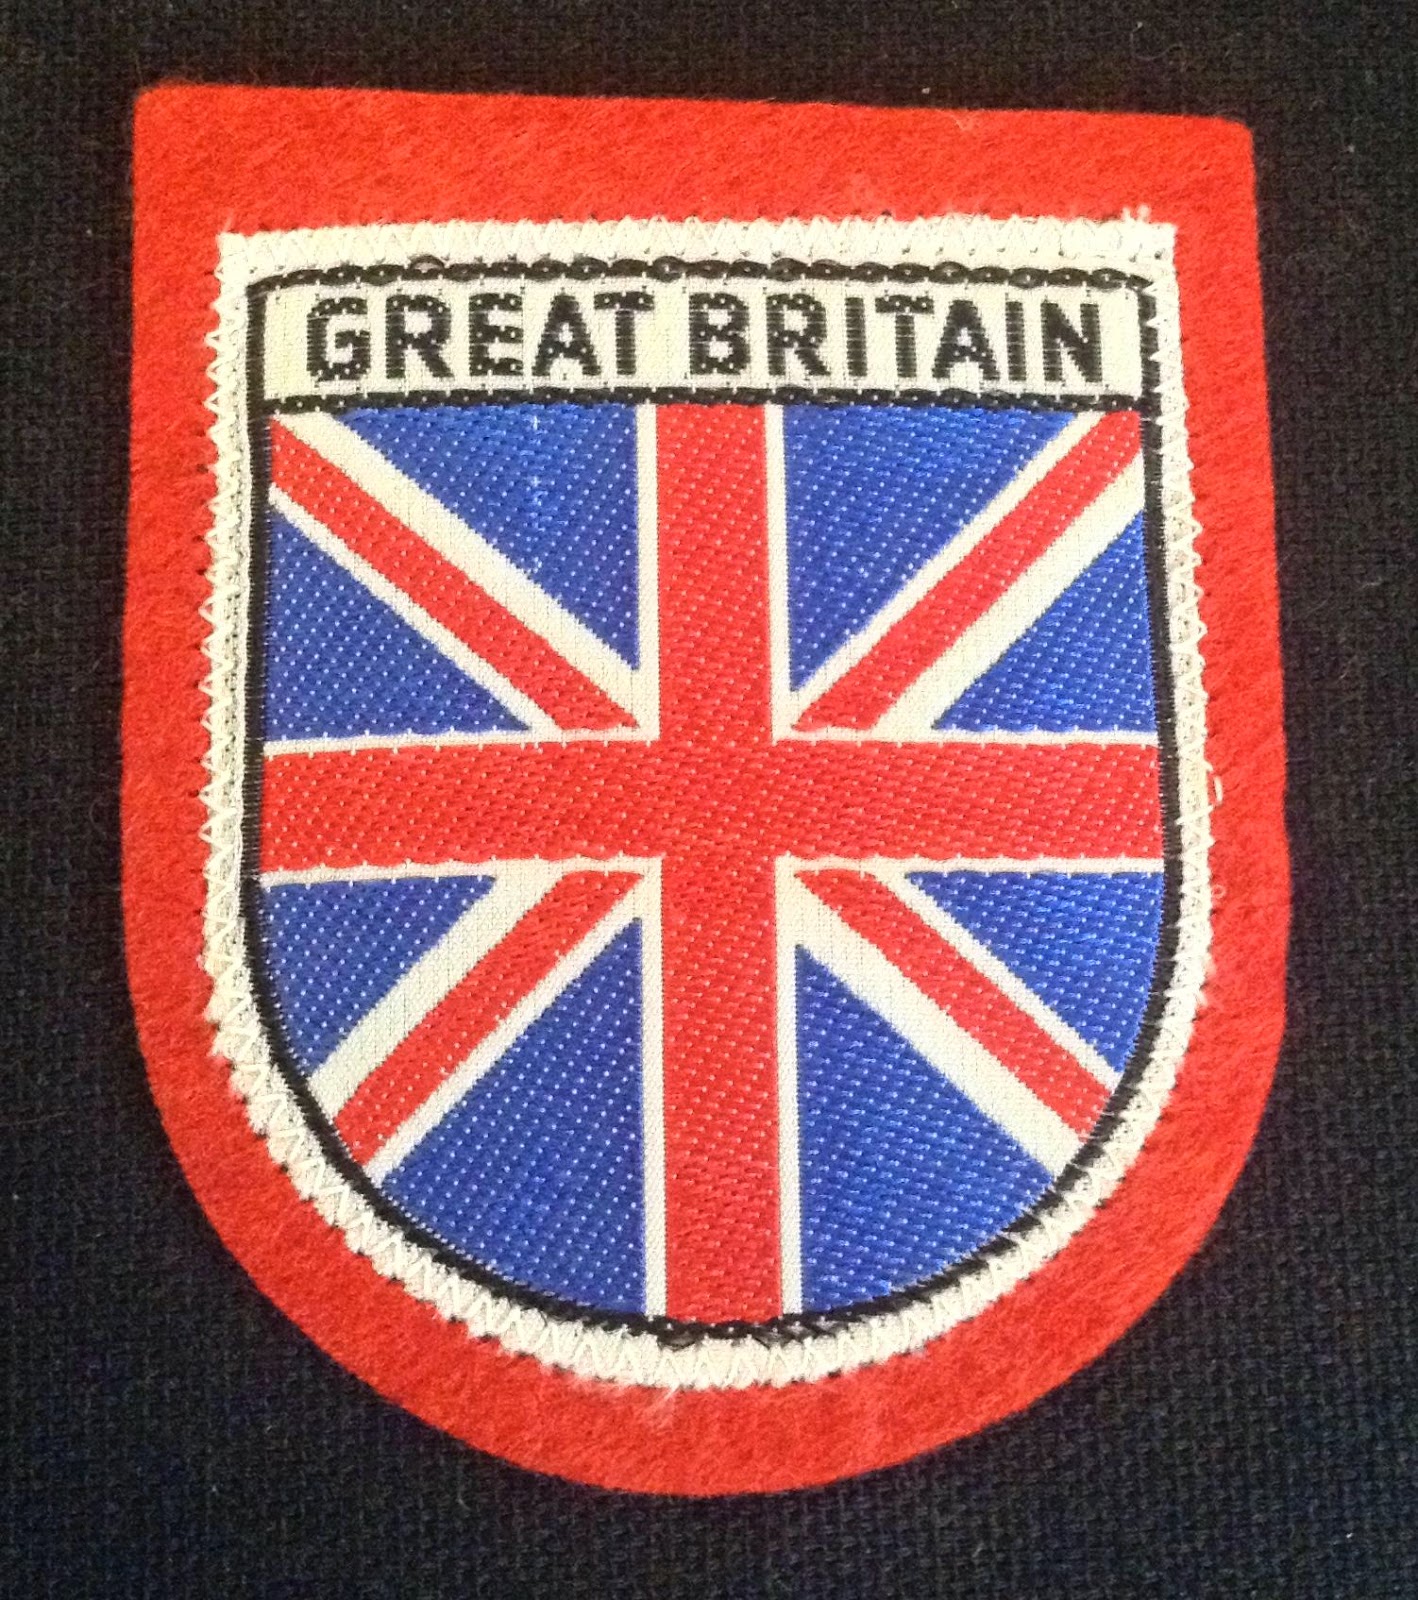 After World War II, the souvenir badge tradition was imported to Britain by...